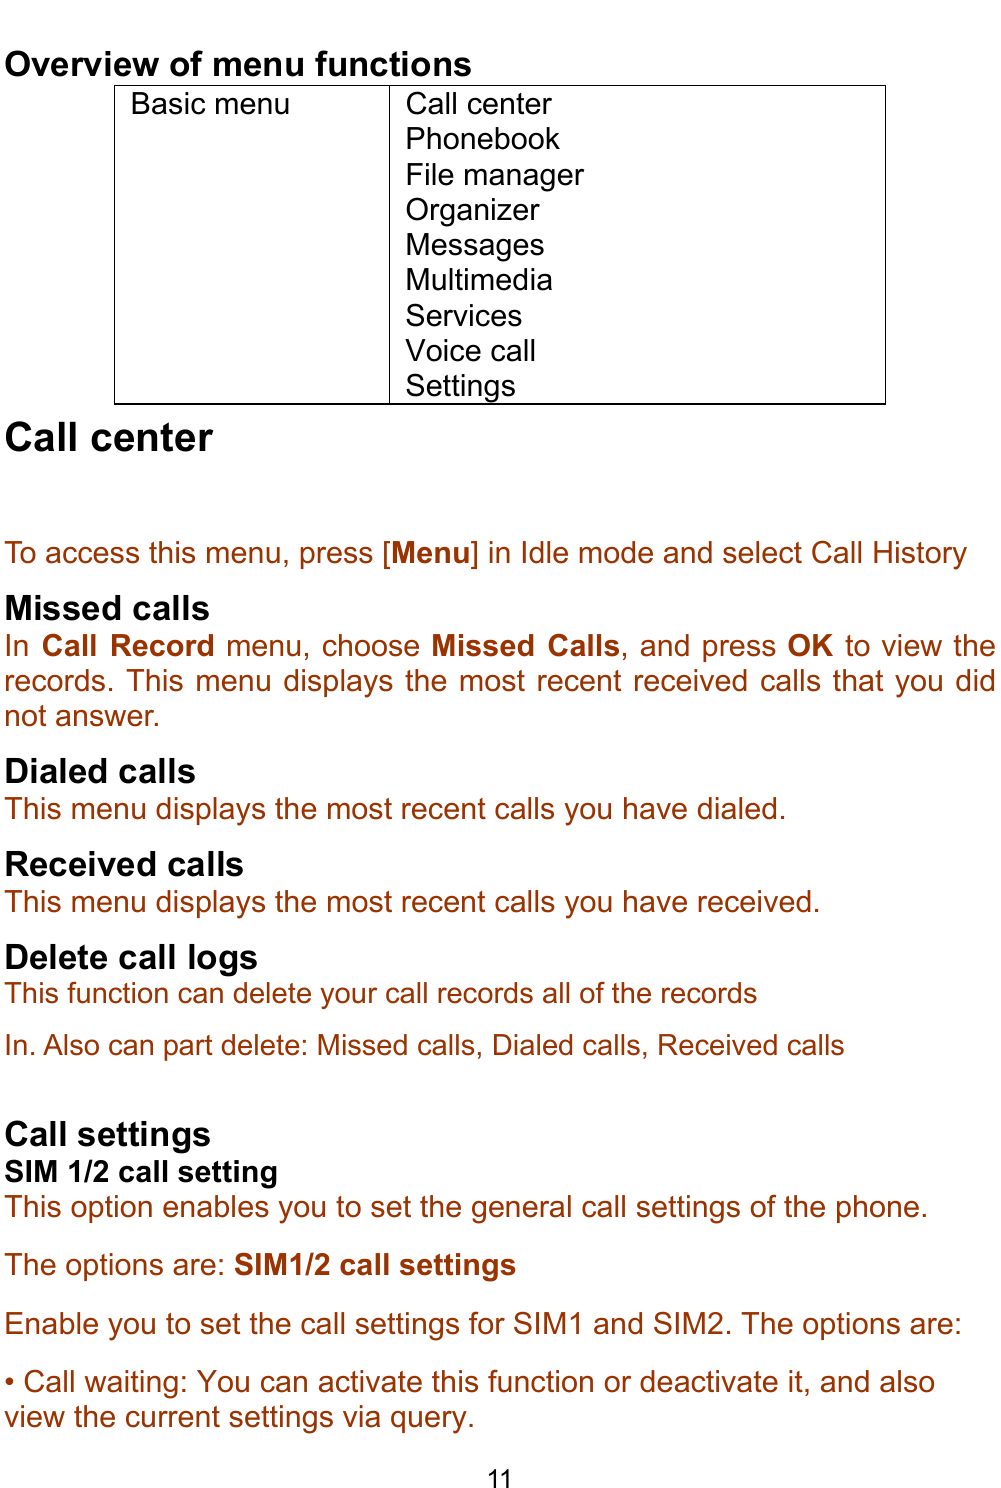    11 Overview of menu functions Basic menu  Call center Phonebook File manager Organizer Messages Multimedia Services Voice call Settings Call center To access this menu, press [Menu] in Idle mode and select Call History  Missed calls In Call Record menu, choose Missed Calls, and press OK  to view the records. This menu displays the most recent received calls that you did not answer.  Dialed calls This menu displays the most recent calls you have dialed. Received calls  This menu displays the most recent calls you have received. Delete call logs This function can delete your call records all of the records In. Also can part delete: Missed calls, Dialed calls, Received calls   Call settings SIM 1/2 call setting This option enables you to set the general call settings of the phone. The options are: SIM1/2 call settings Enable you to set the call settings for SIM1 and SIM2. The options are: • Call waiting: You can activate this function or deactivate it, and also view the current settings via query. 